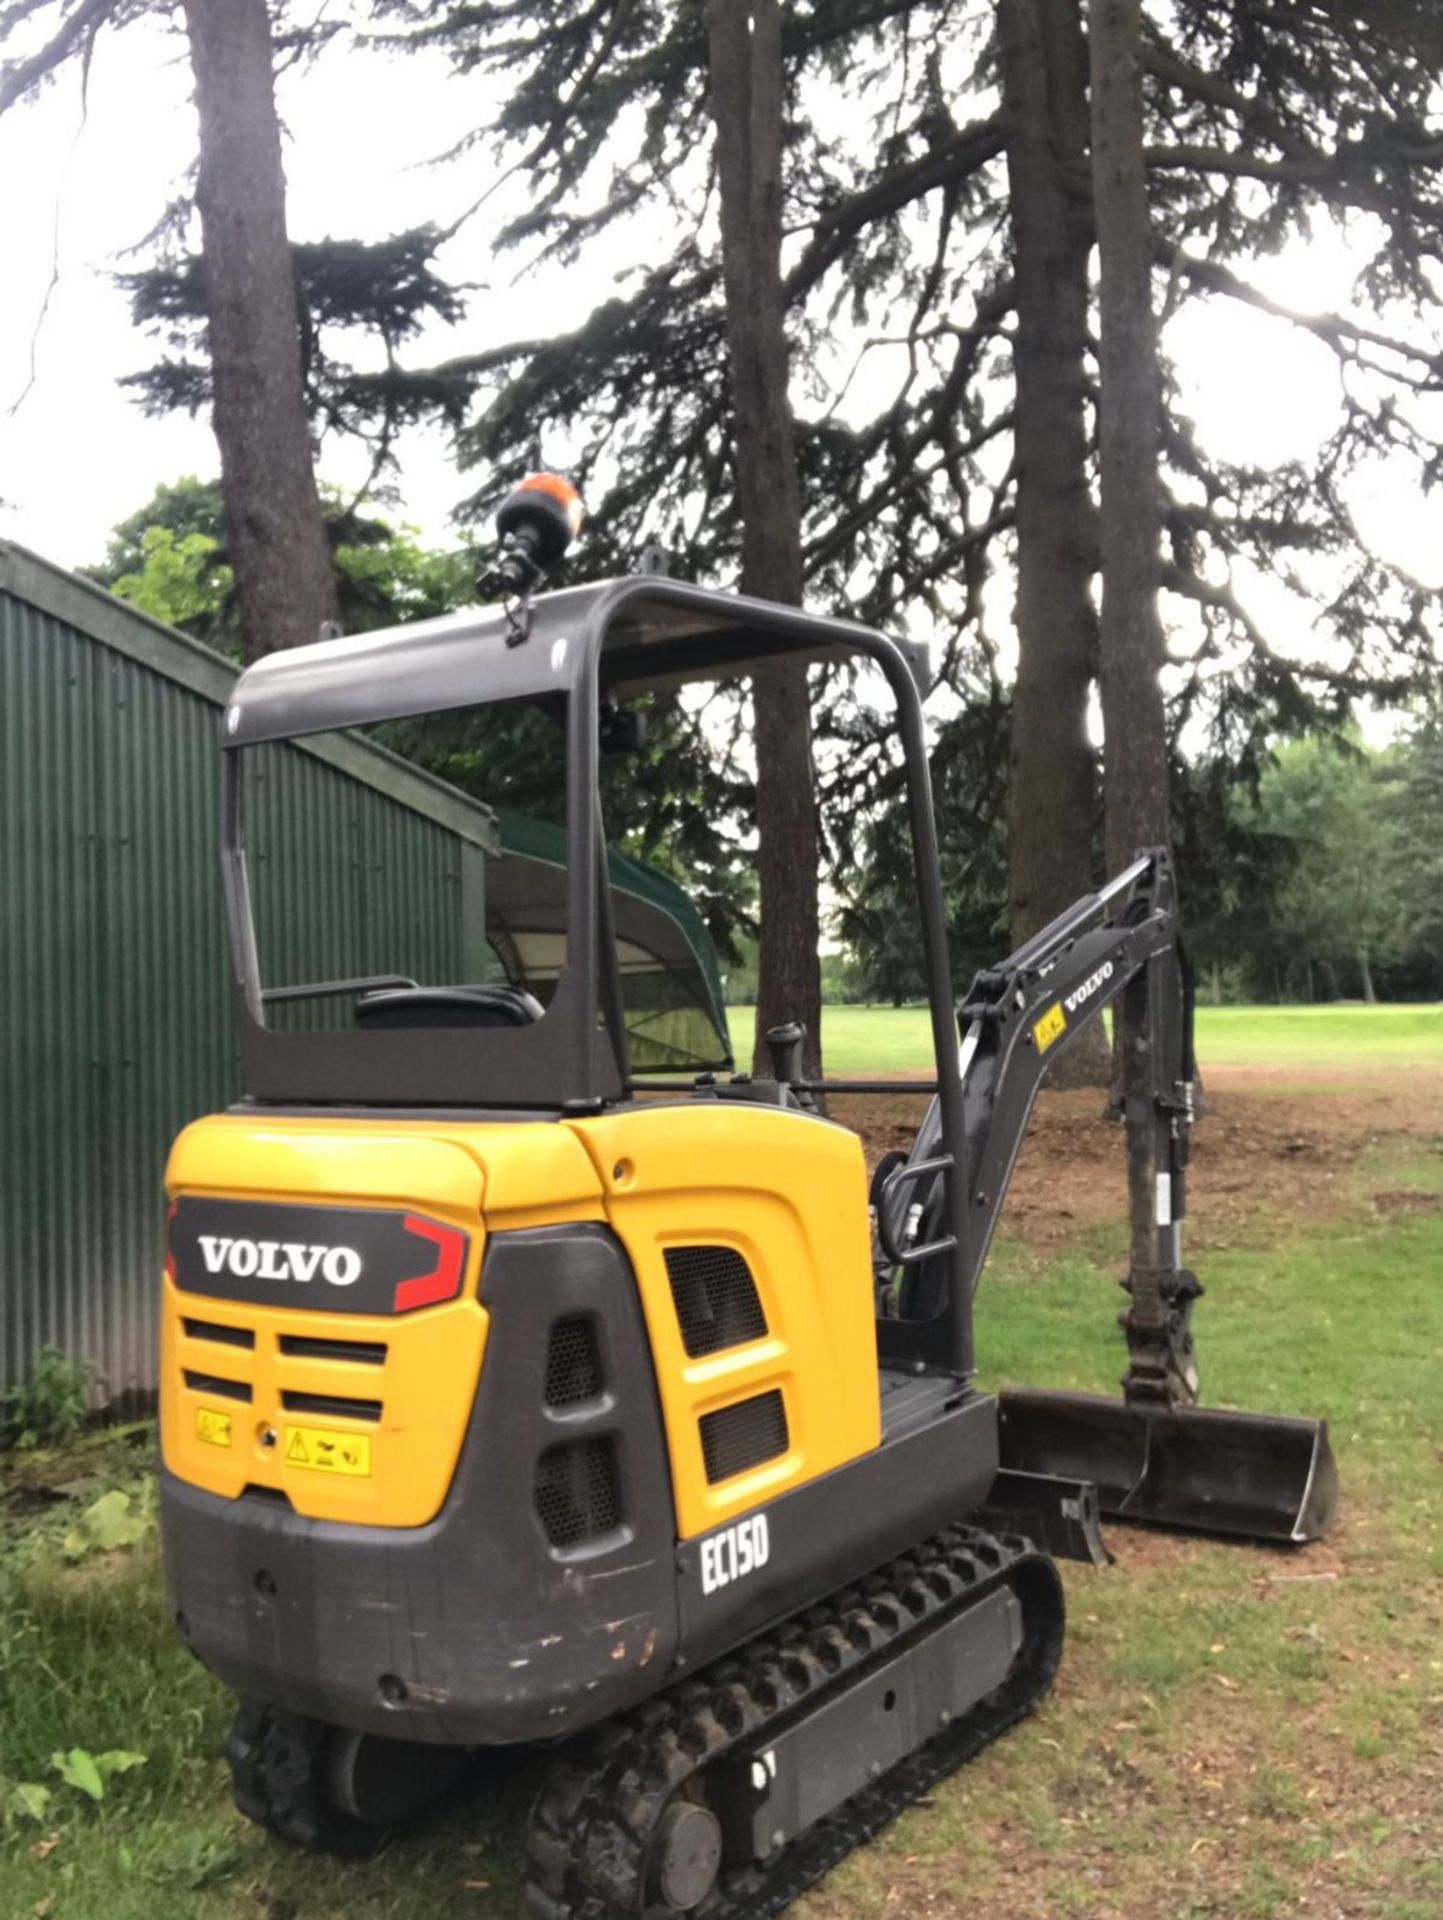 VOLVO EC15D 1.5 TONNE MINI DIGGER WITH SET OF BUCKETS YEAR 2015 BUILD. OWNED BY SELLER FROM NEW - Image 6 of 18